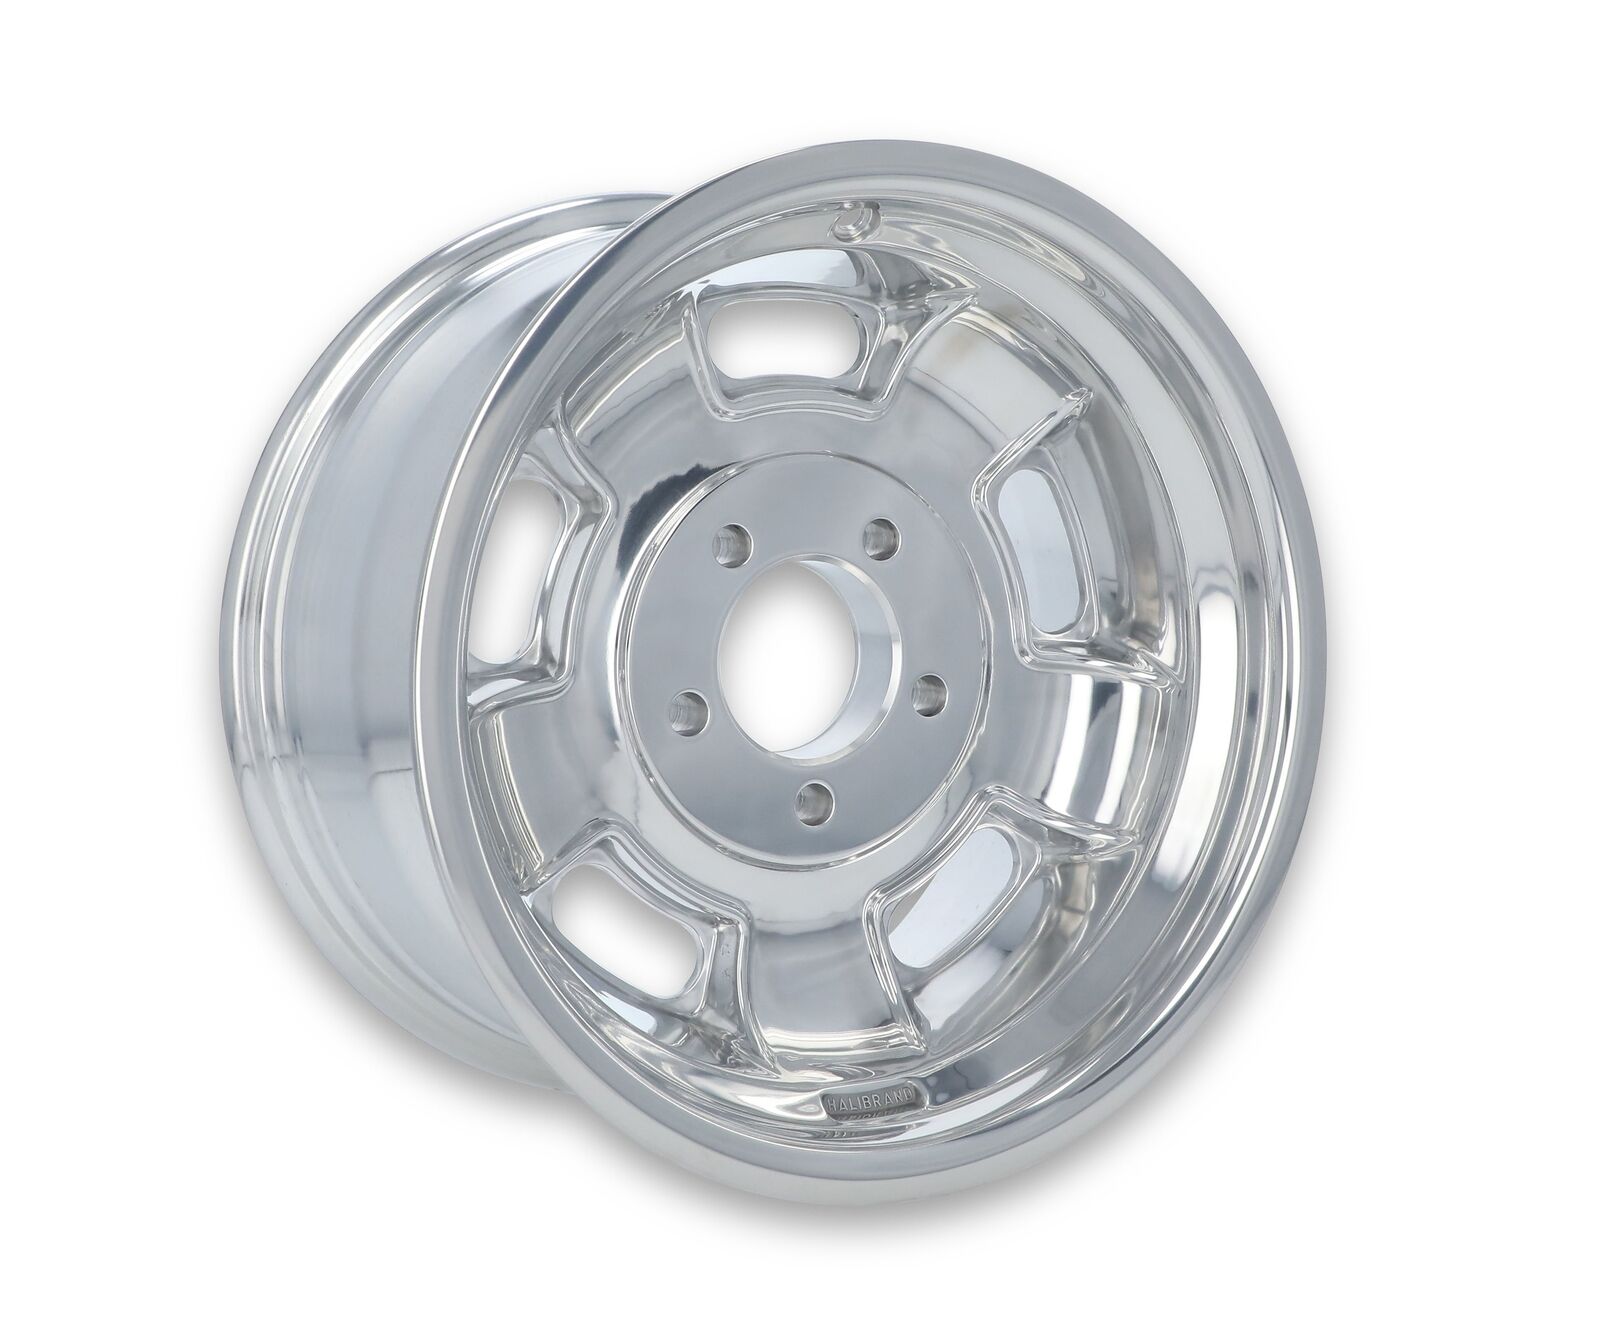 HB008-030 Halibrand Sprint Wheel 15x8 - 5x4.75  4.25 BS Polished No Clearcoat